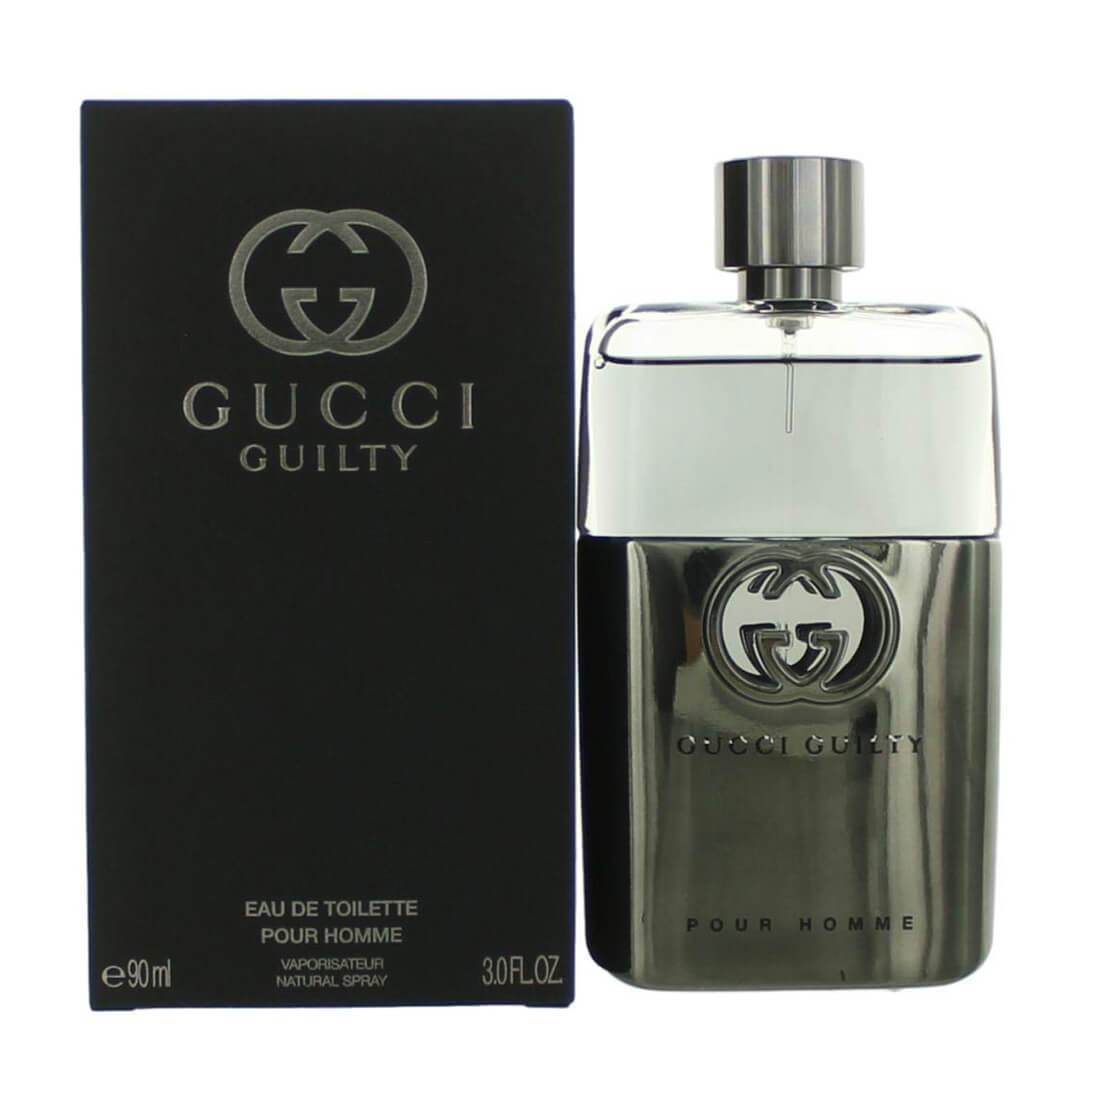 Buy Gucci Guilty Intense Eau De Toilette Spray, 50.27ml Online at Low  Prices in India - Amazon.in